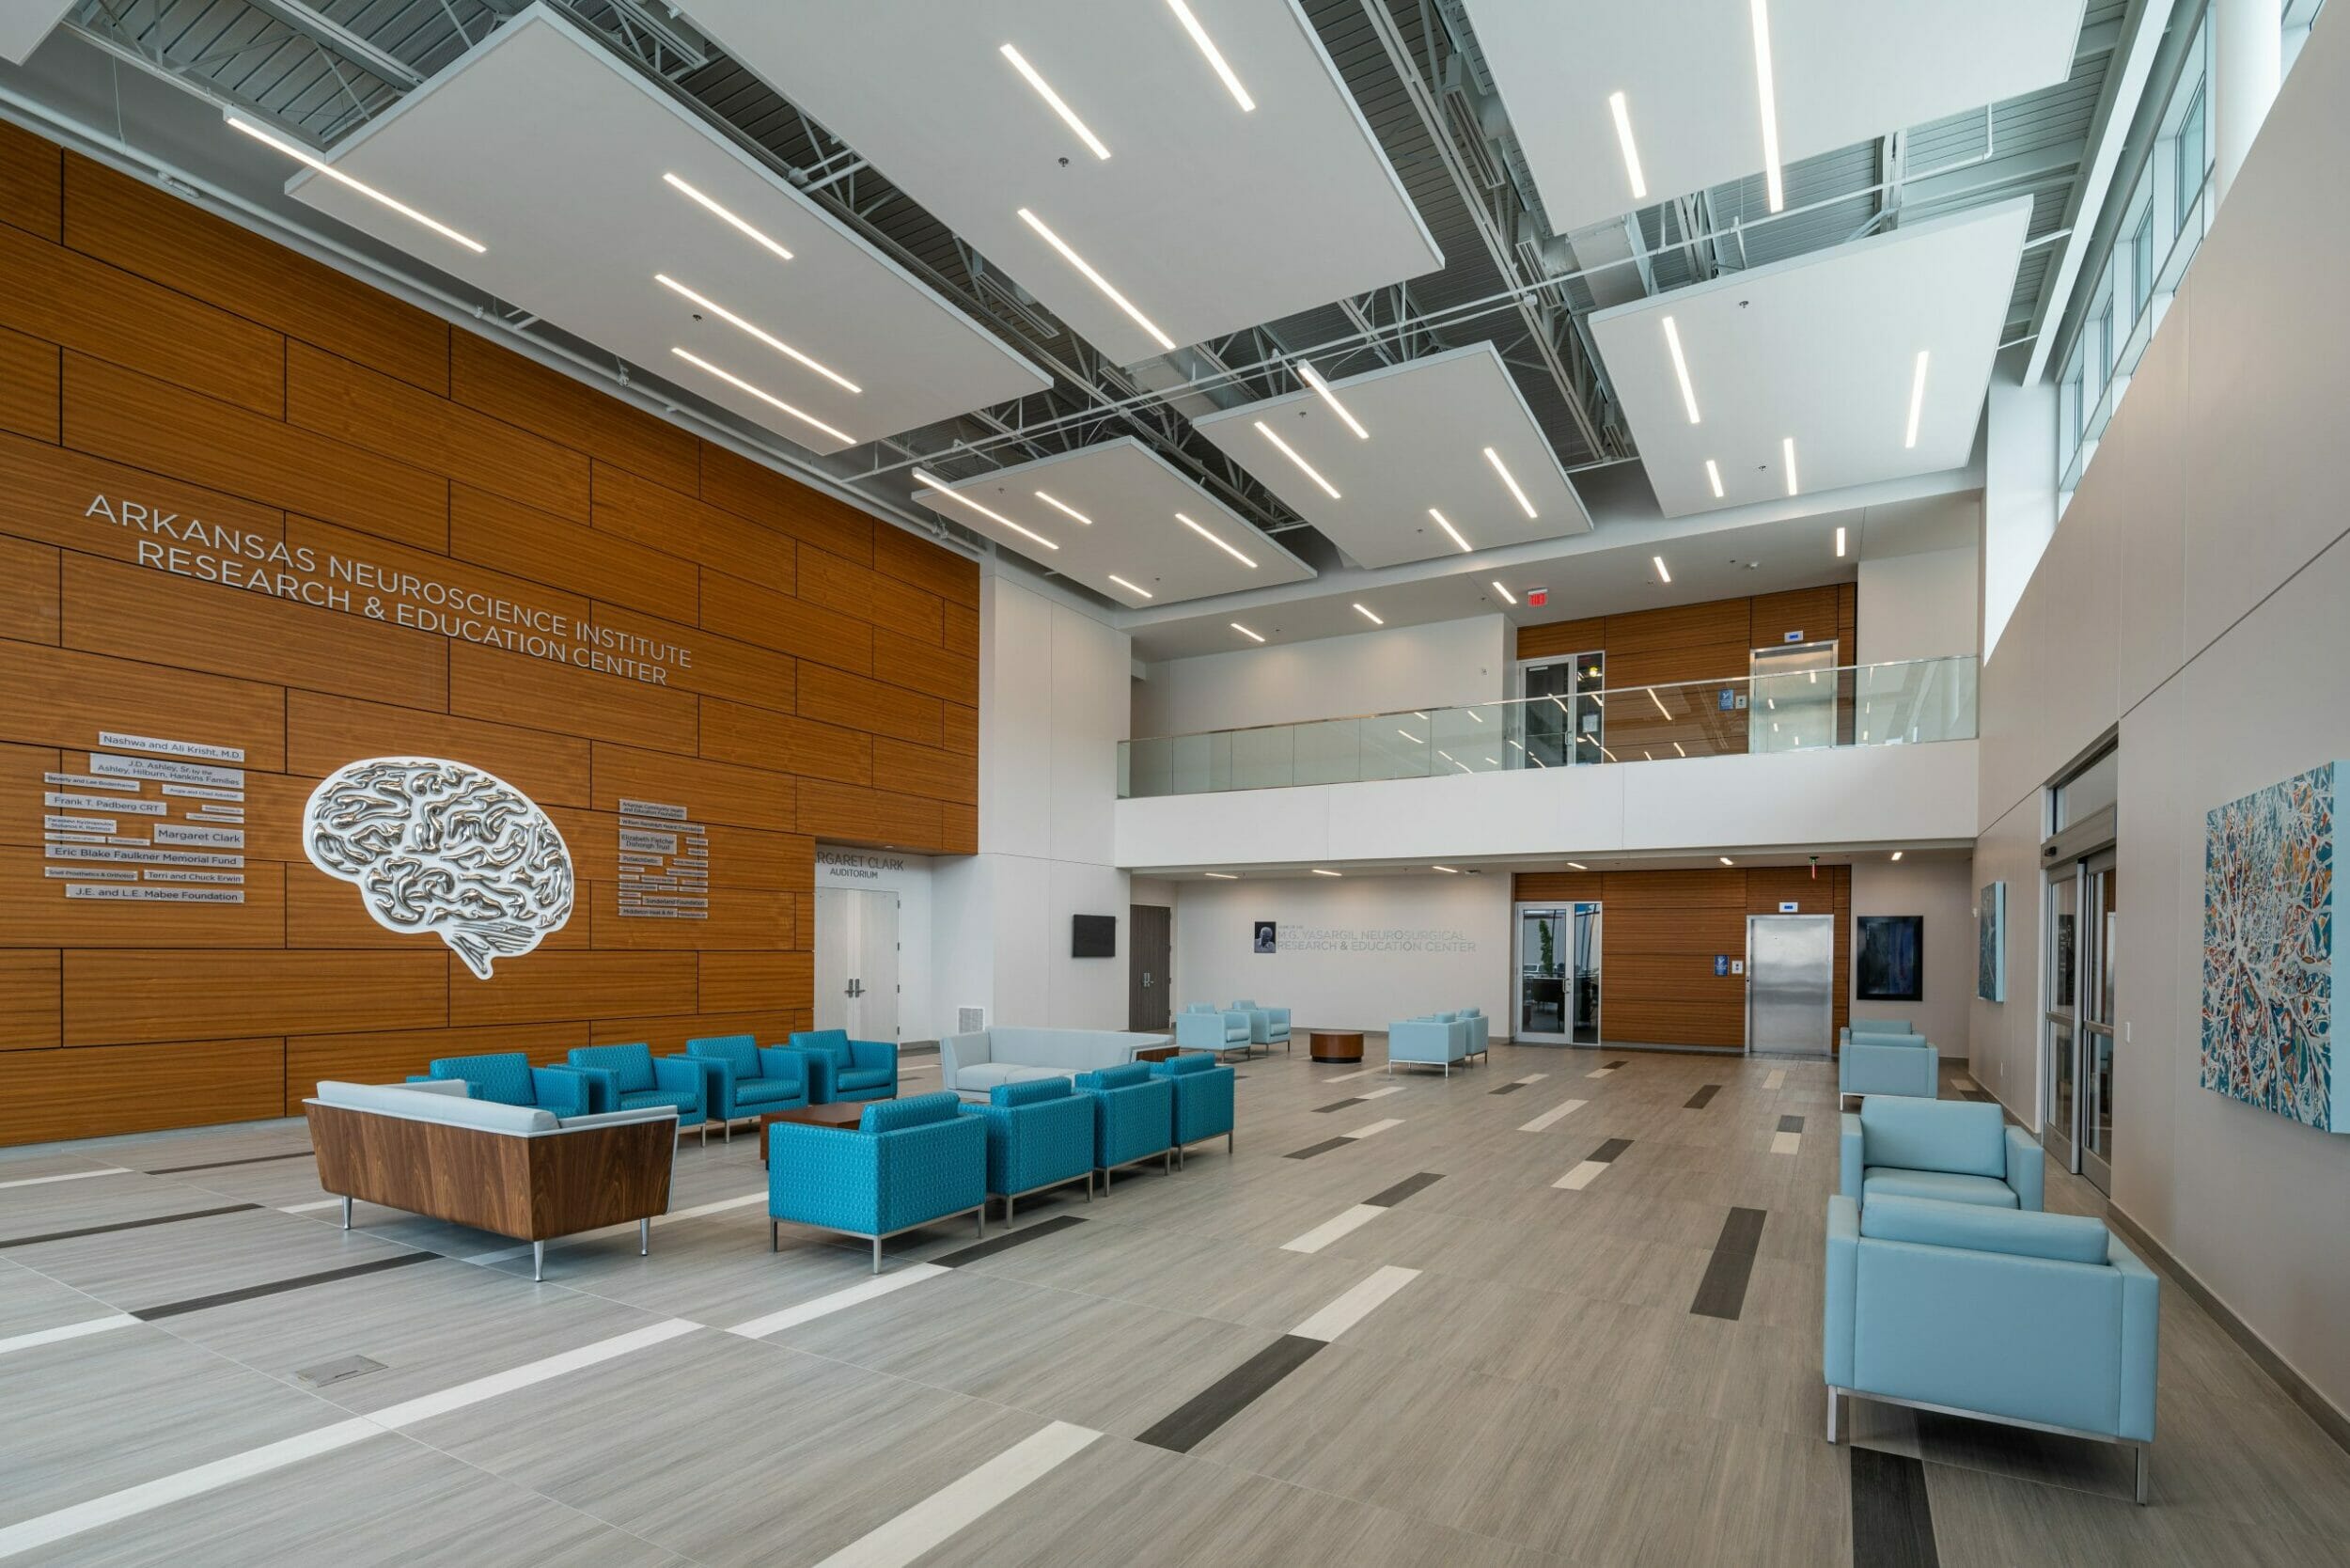 Two-story lobby of the Arkansas Neuroscience Institute Research & Education Center with various wood accents, a large silver brain on a wood wall, and blue furniture